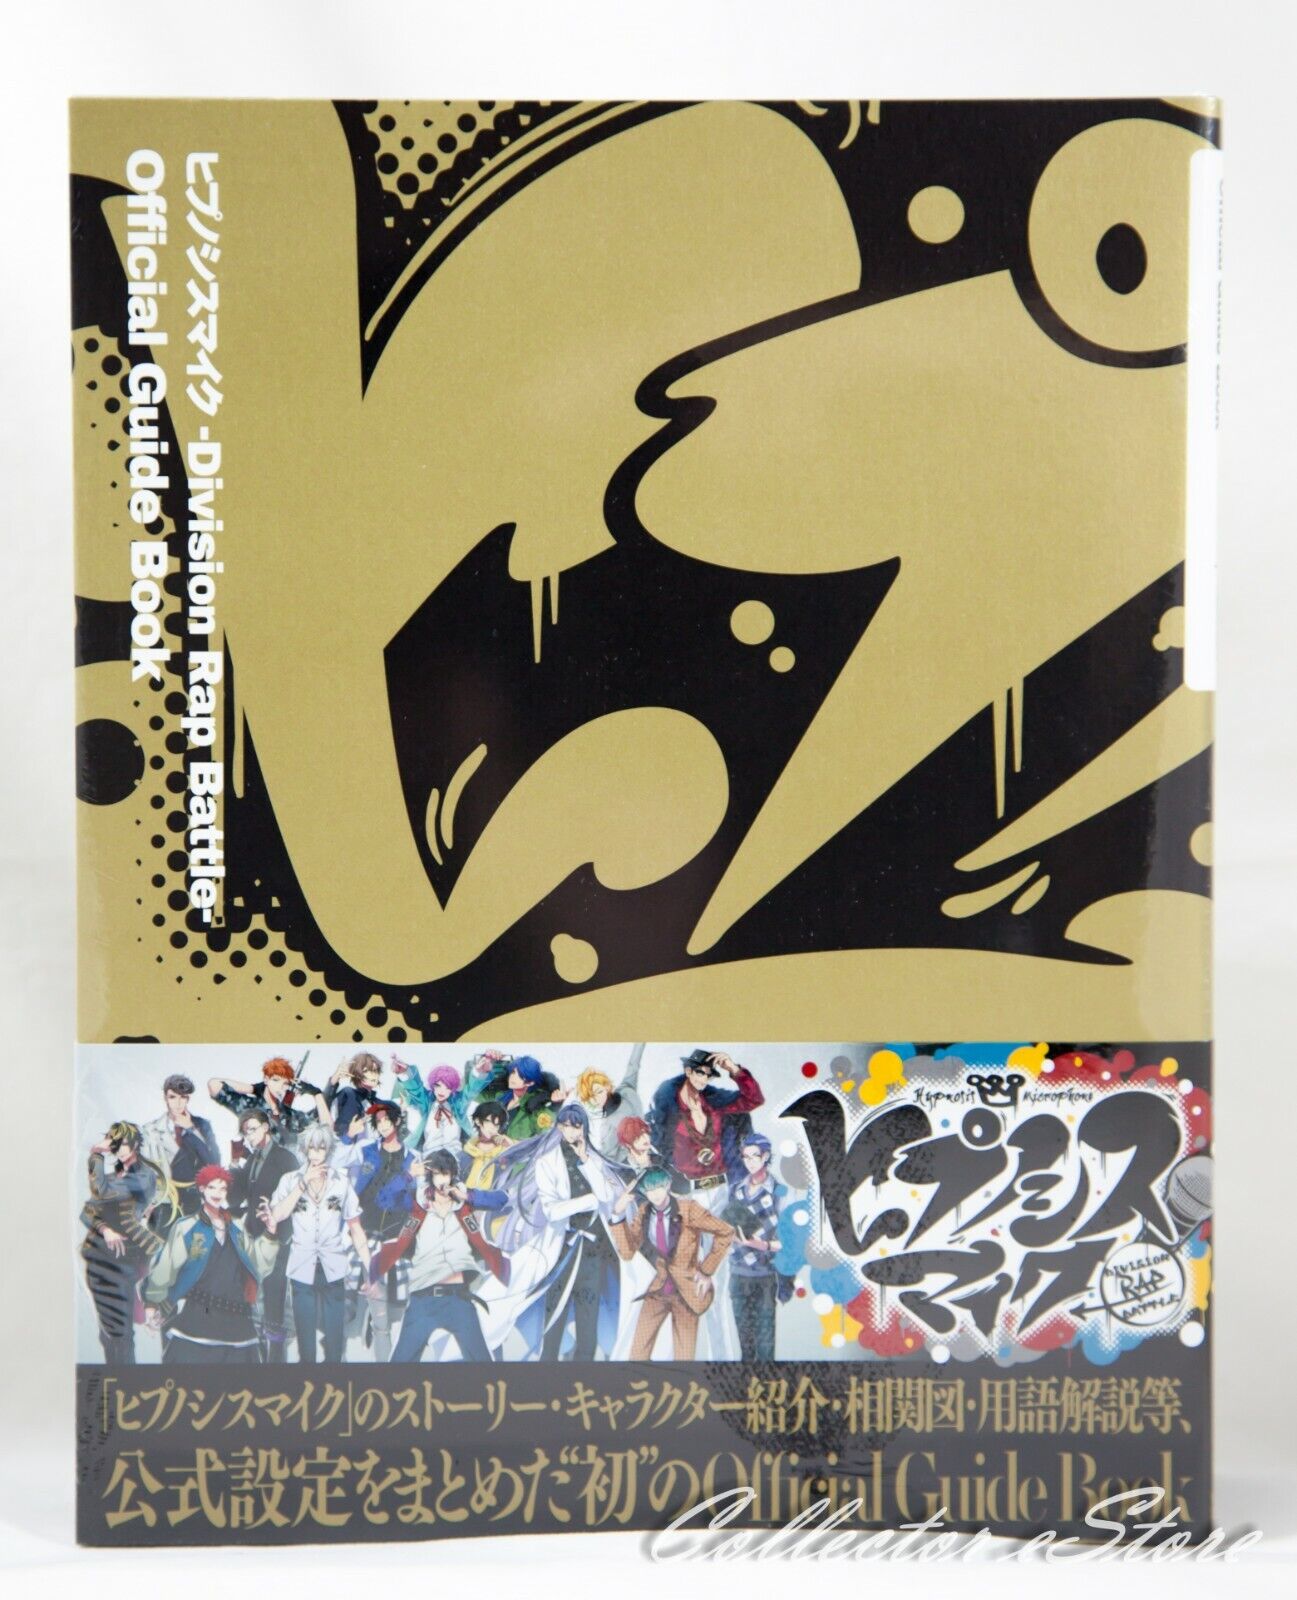 FedEx/DHL | Hypnosis Mic: Division Rap Battle Official Guide Book